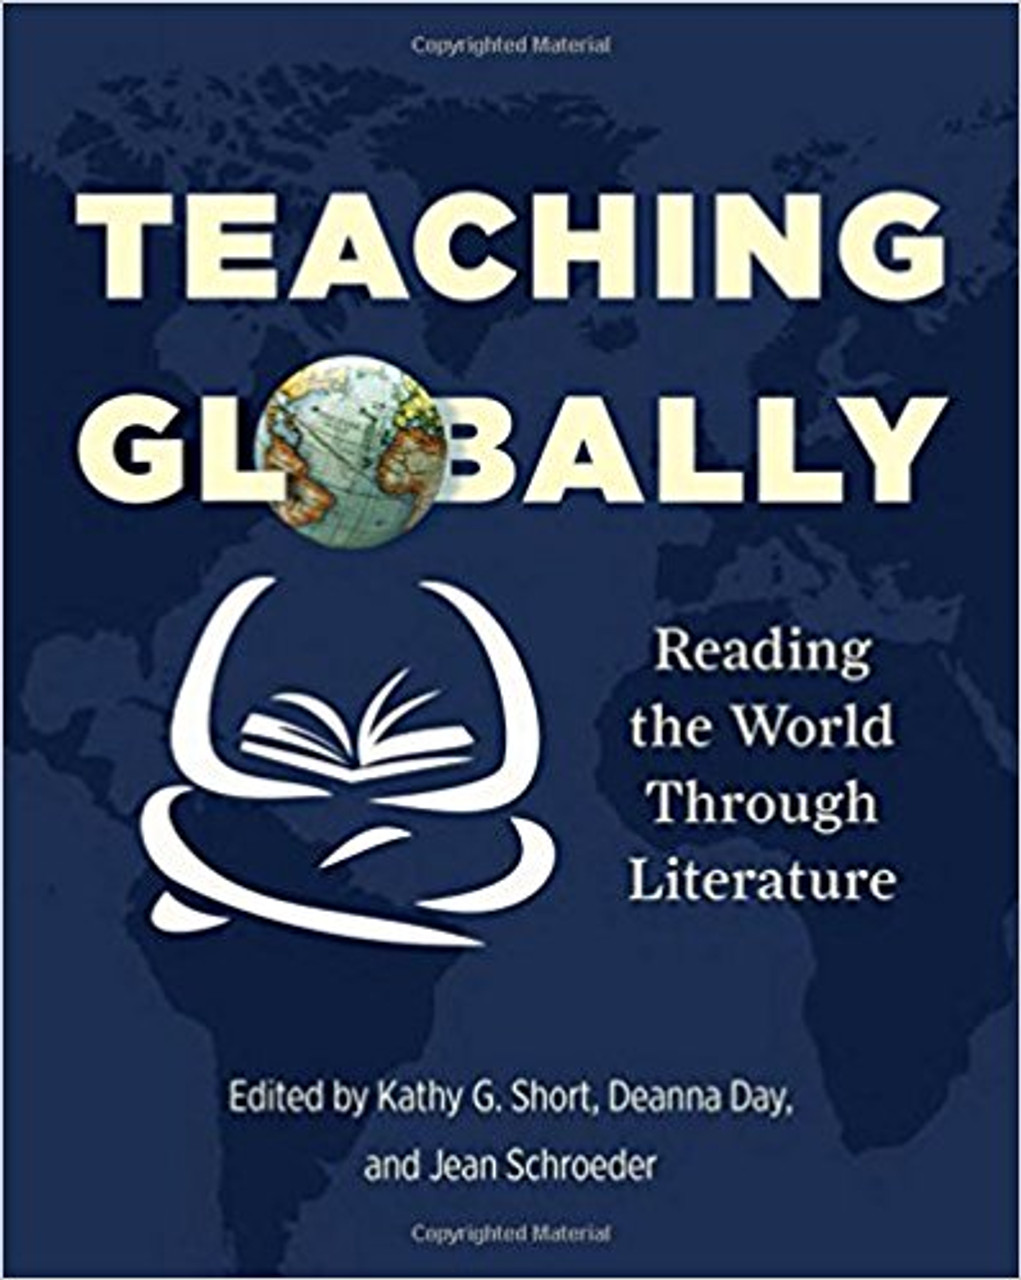 Teaching Globally: Reading the World Through Literature by Kathy G Short